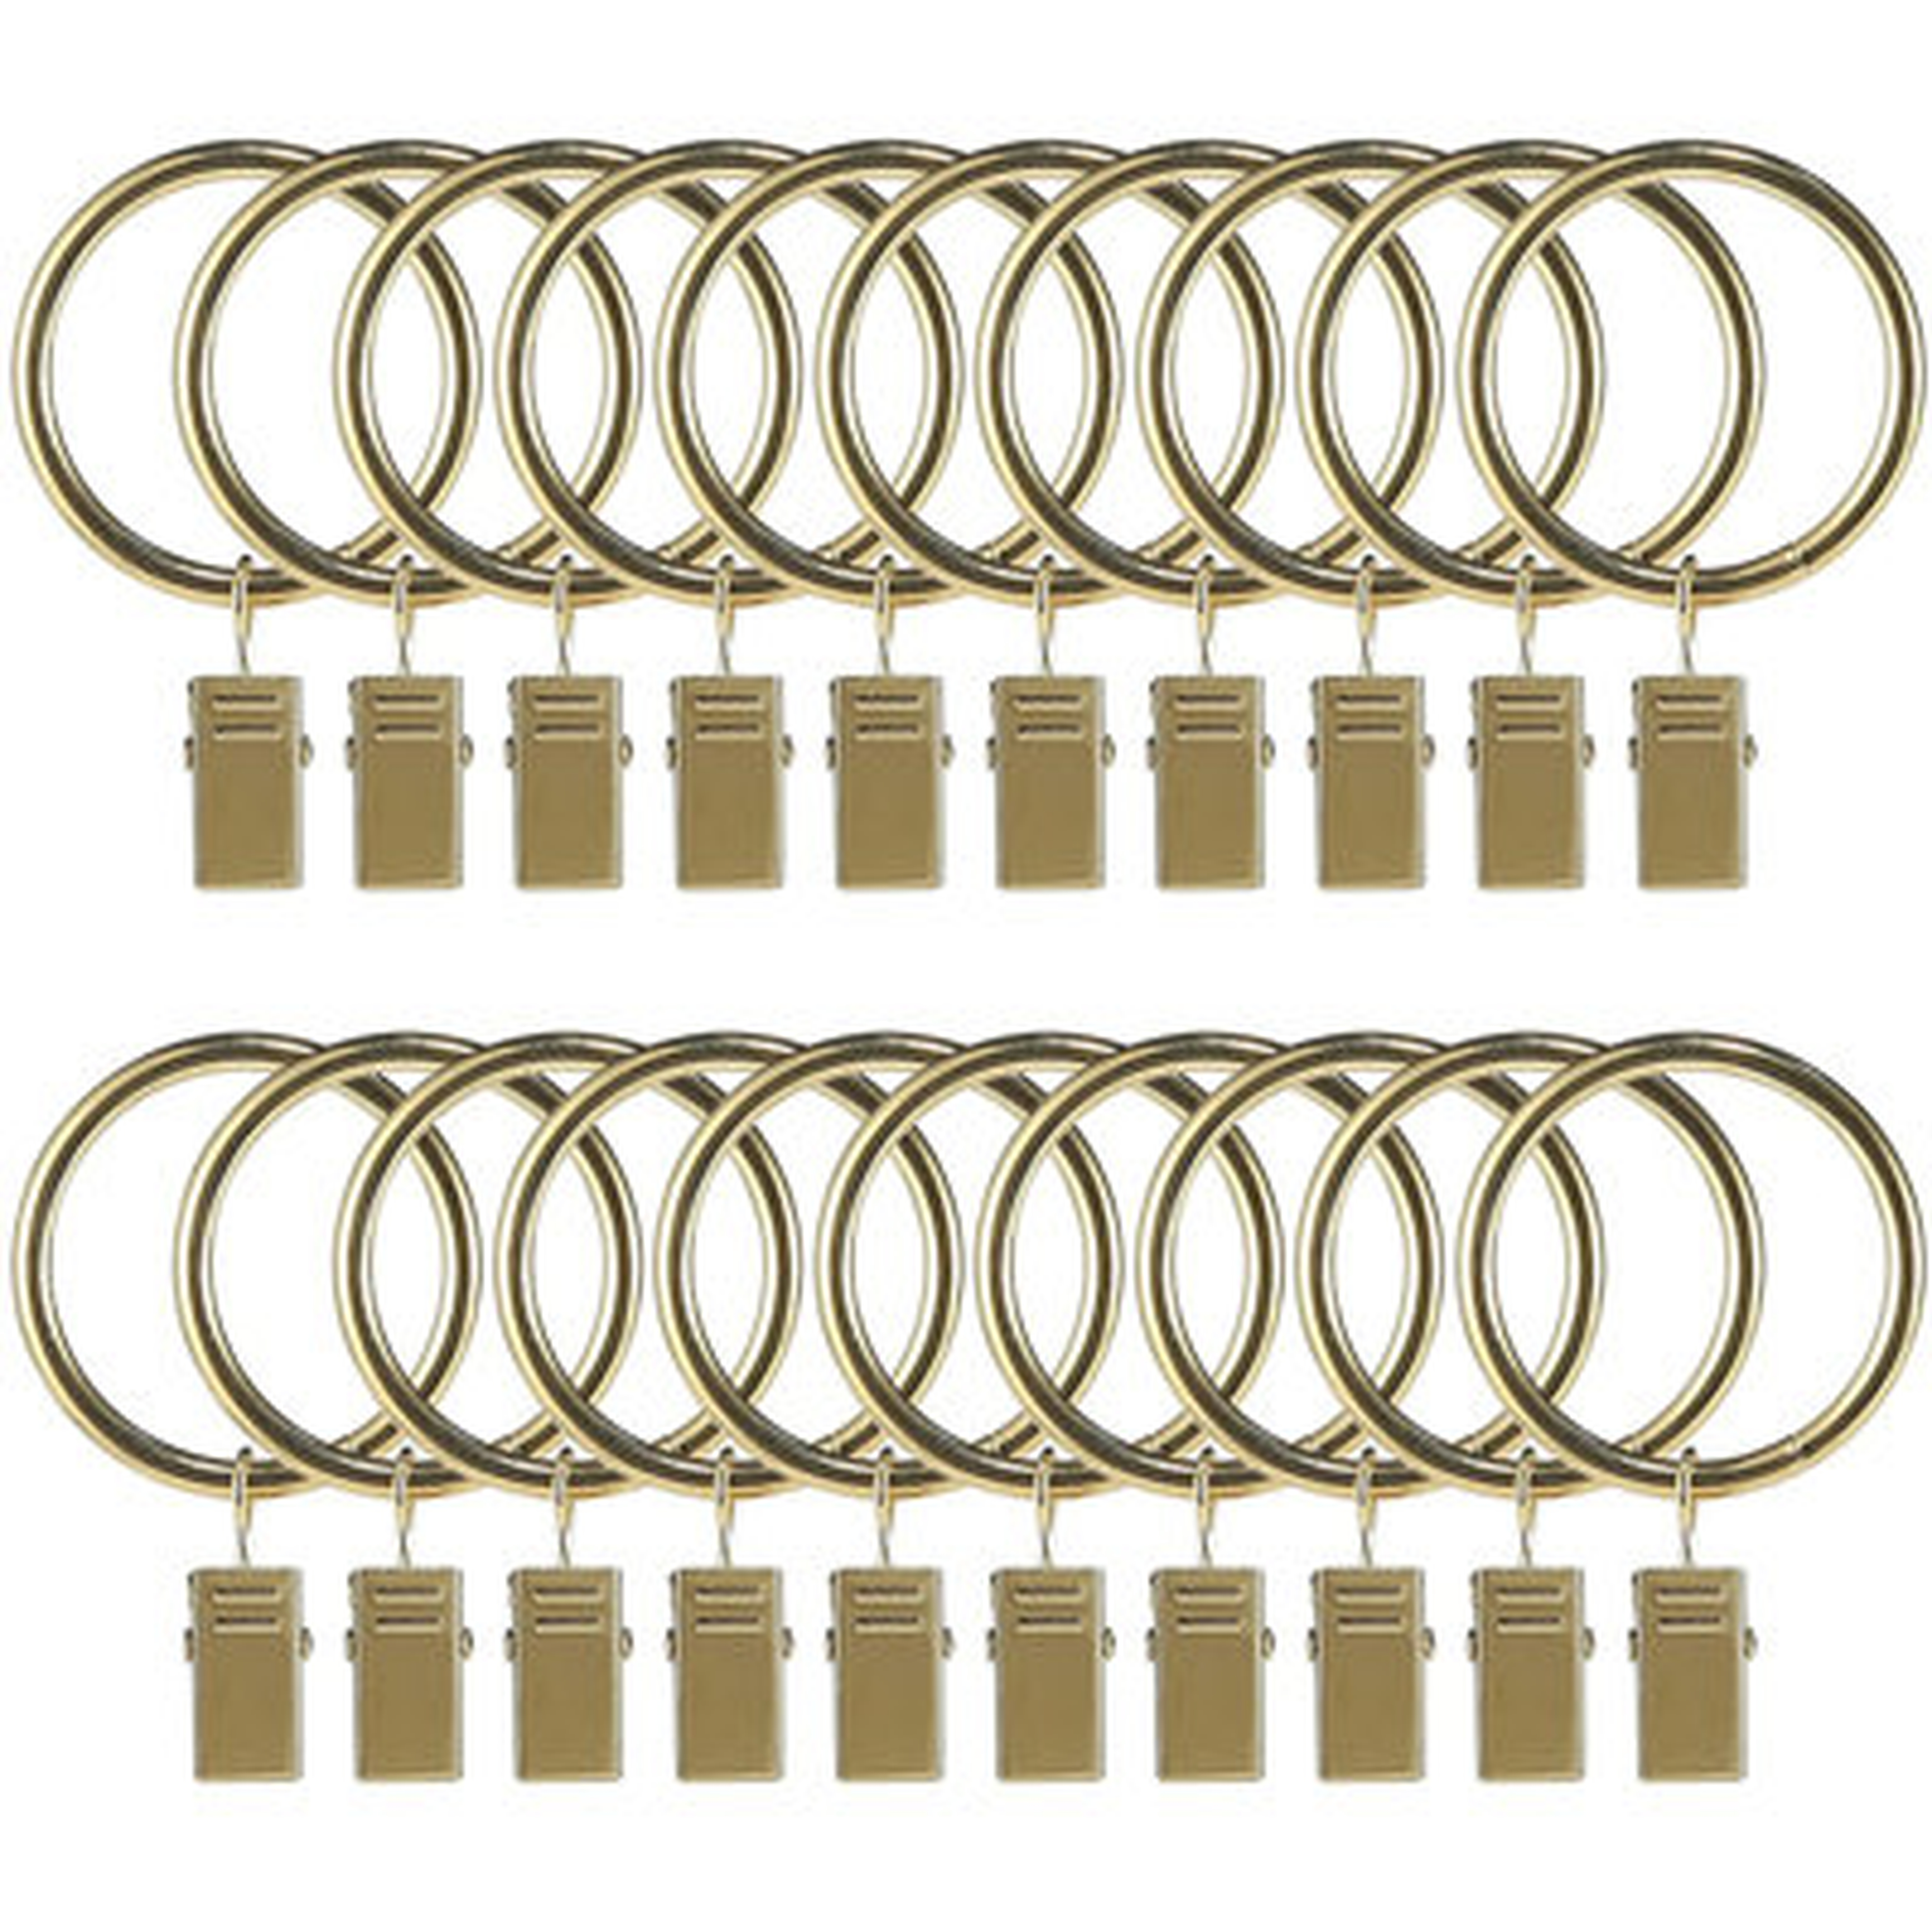 1.5 Inch Curtain Hooks,  40 Pcs Curtain Rings, Rustproof Curtain Rings With Clips, Metal Solid Curtain Clips With Rings, Decorative Vintage Drapes Rings For Drapes - Wayfair